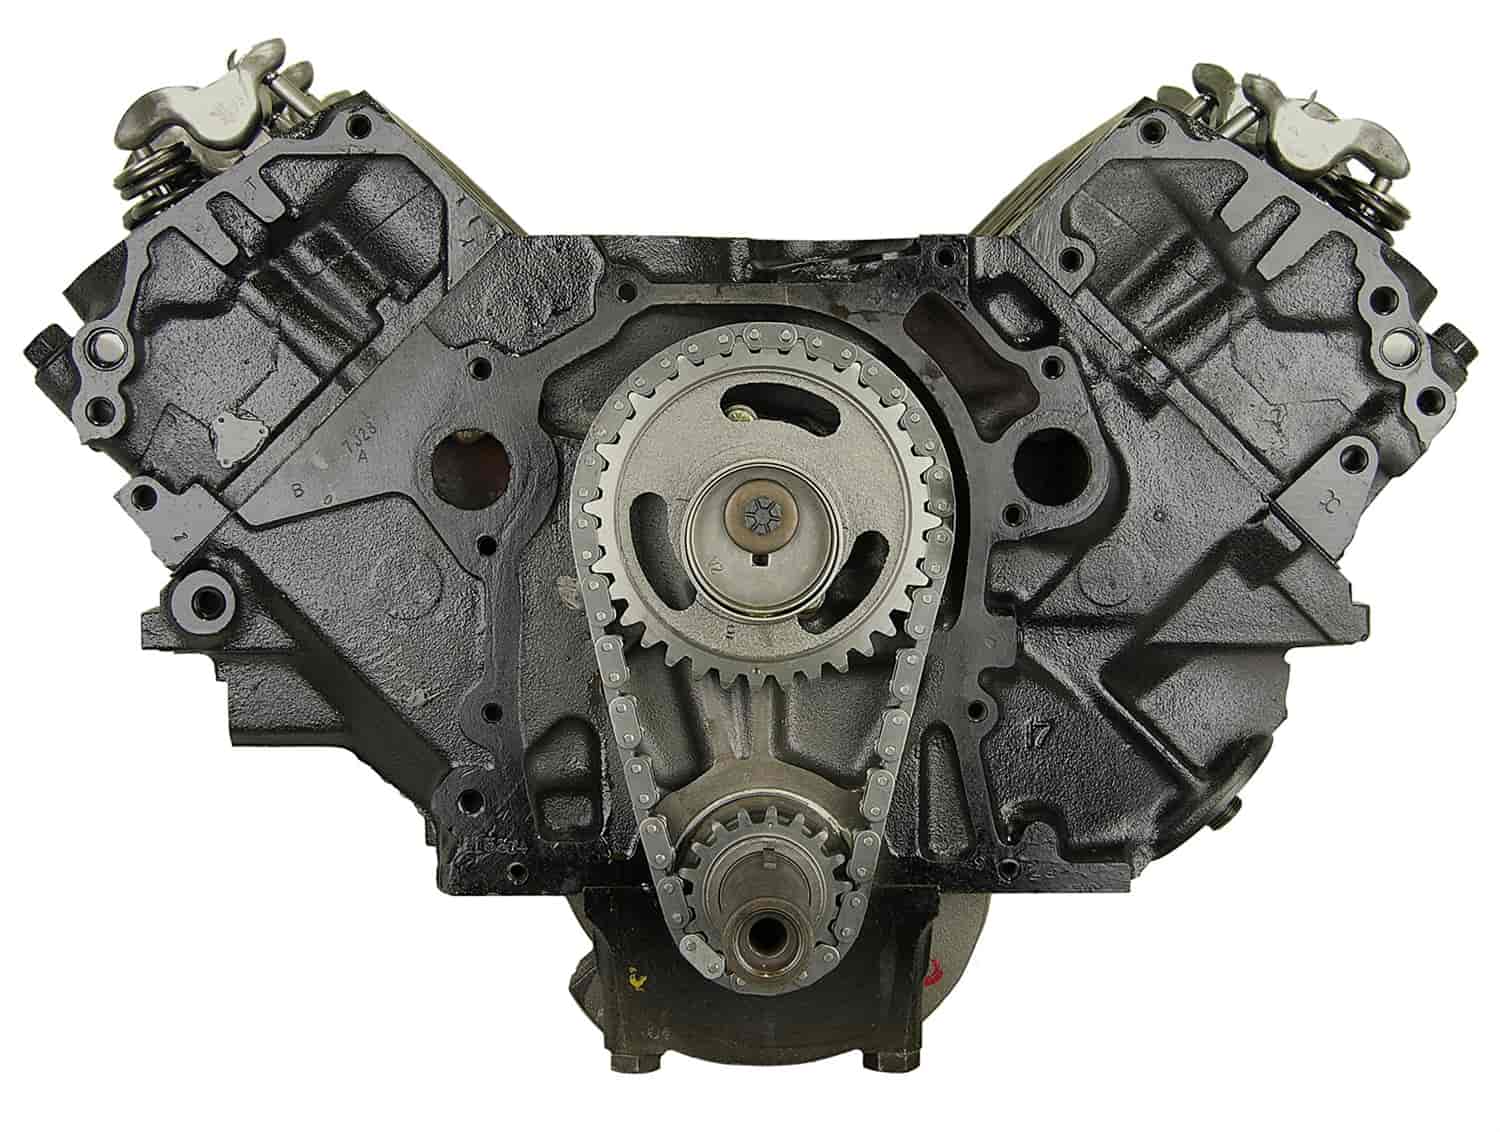 Remanufactured Crate Engine for Marine Applications with 1973-1978 Big Block Ford 460ci/7.5L